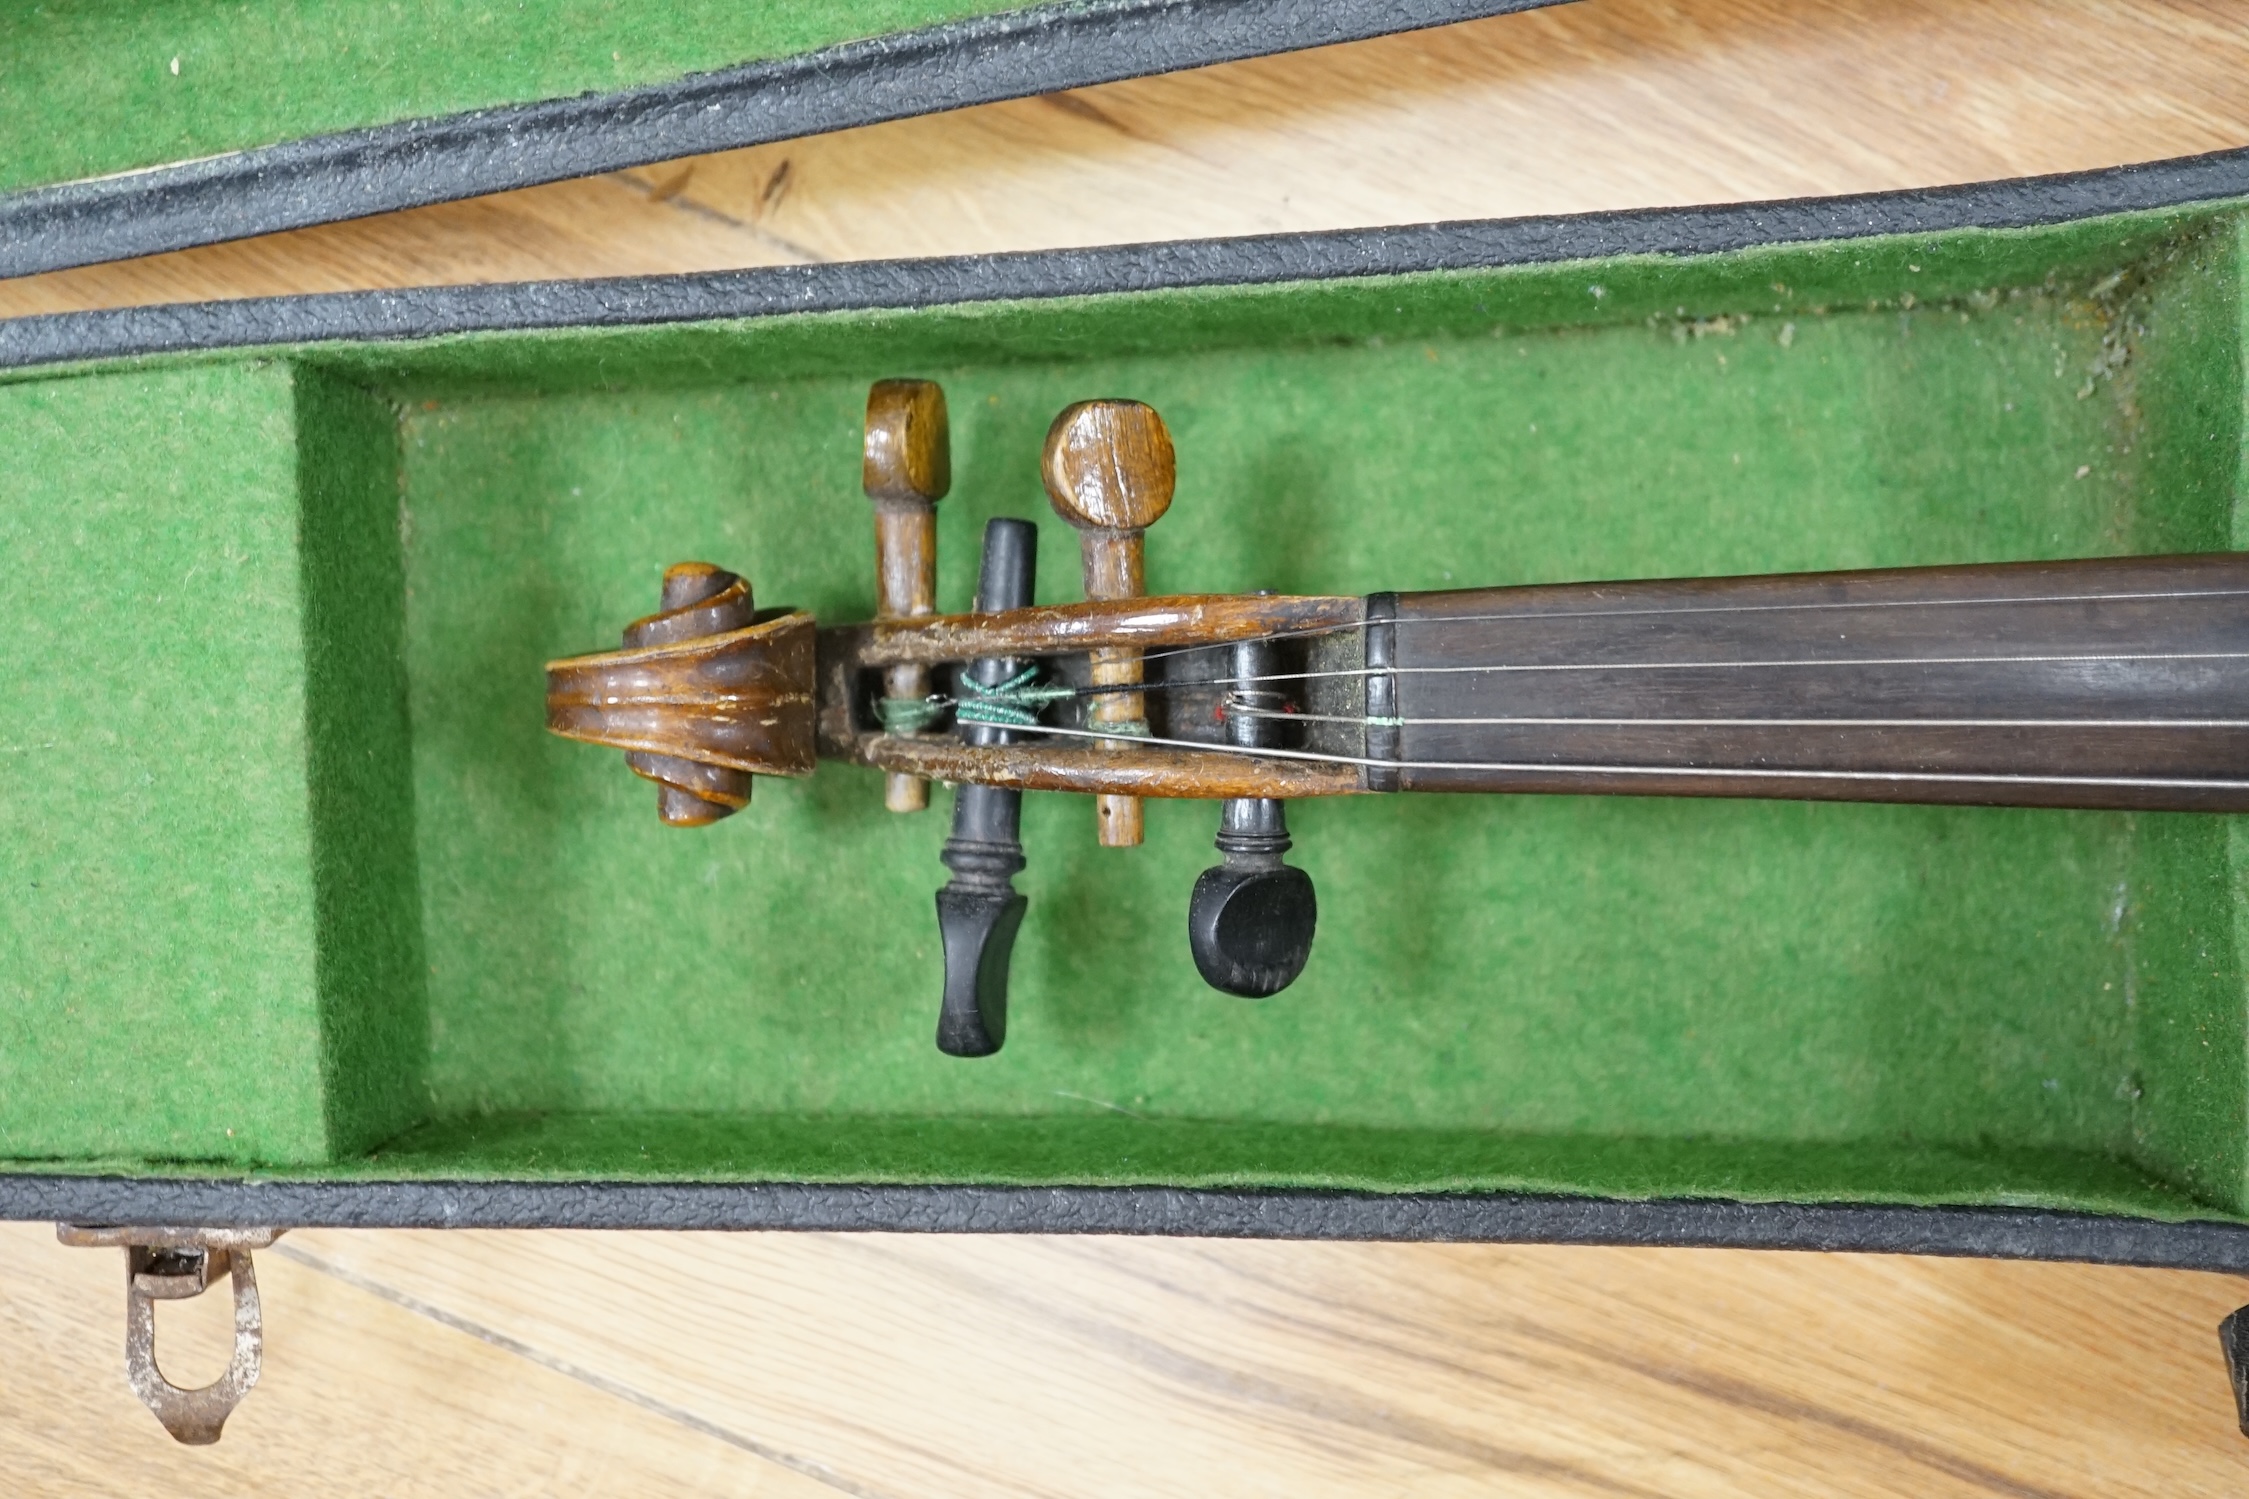 A cased late 19th century violin, back measures 36cm